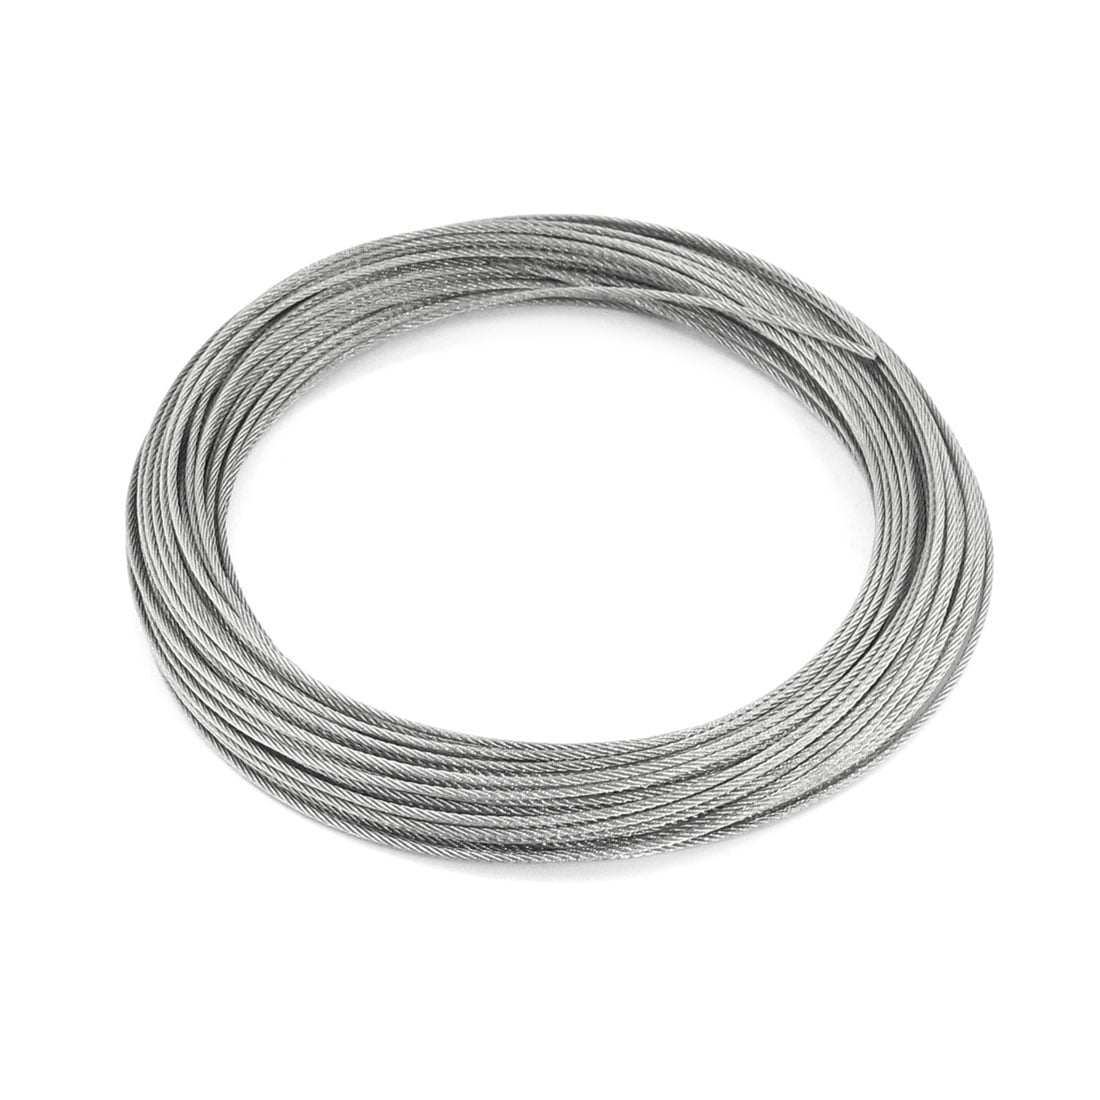 304 Stainless Steel Wire Rope Cable 7x7,100 ft 3/64" 